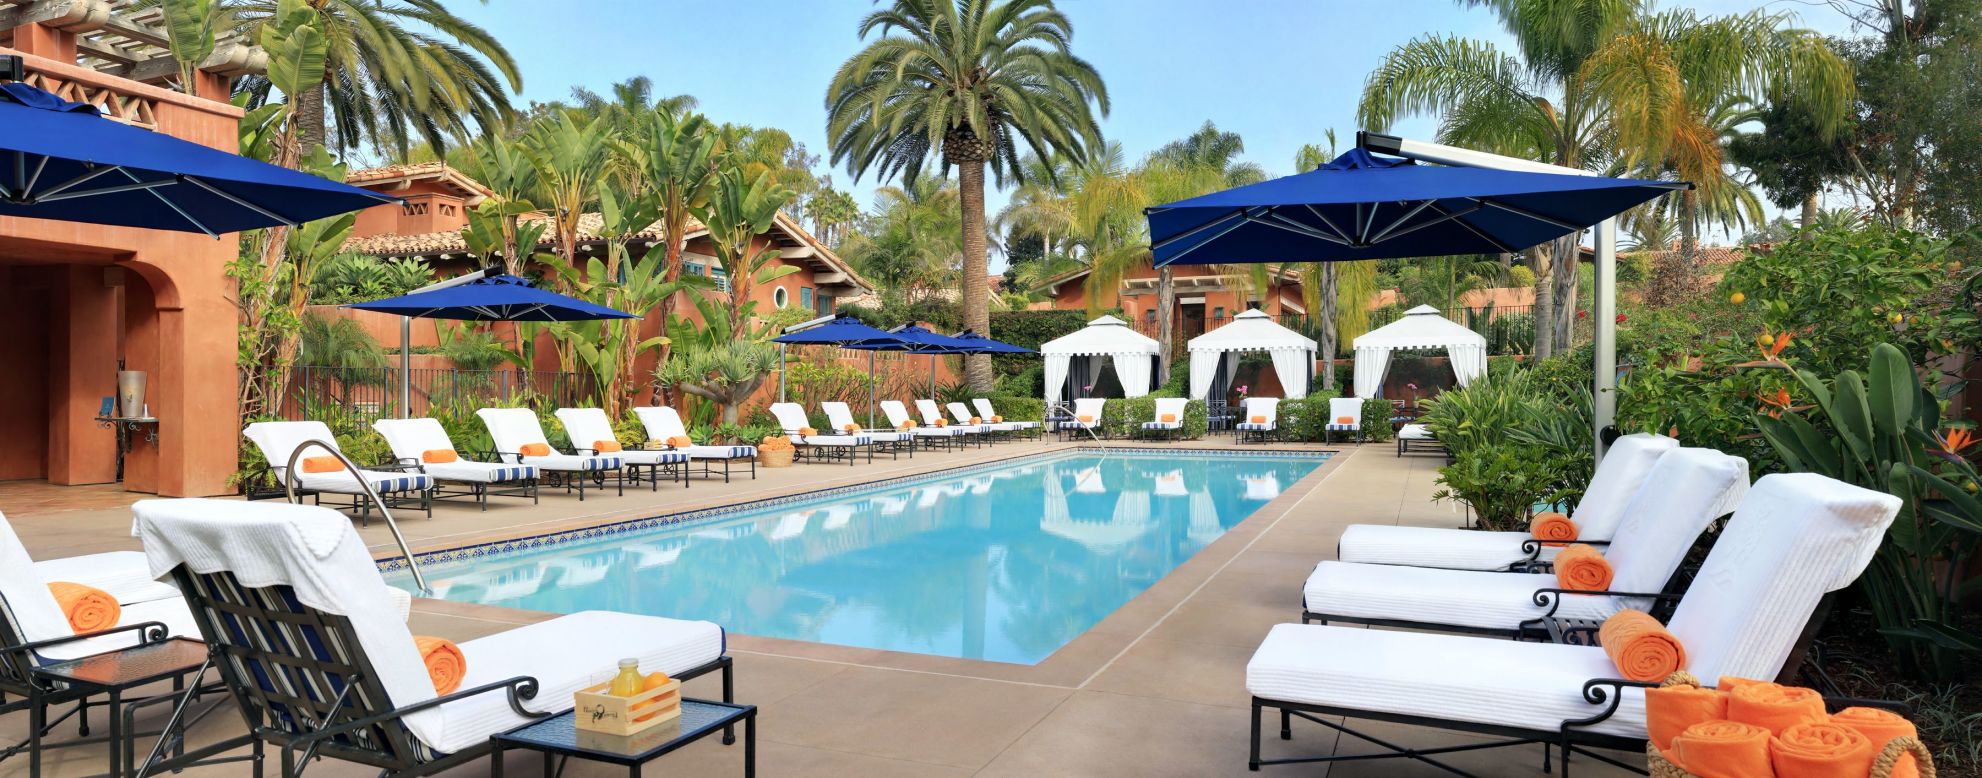 U.S. News & World Report has announced its fifth annual<a href="http://travel.usnews.com/Hotels/" target="_blank" target="_blank"> "Best Hotels of 2015" </a>list, and Rancho Valencia Resort & Spa took the top U.S. spot.